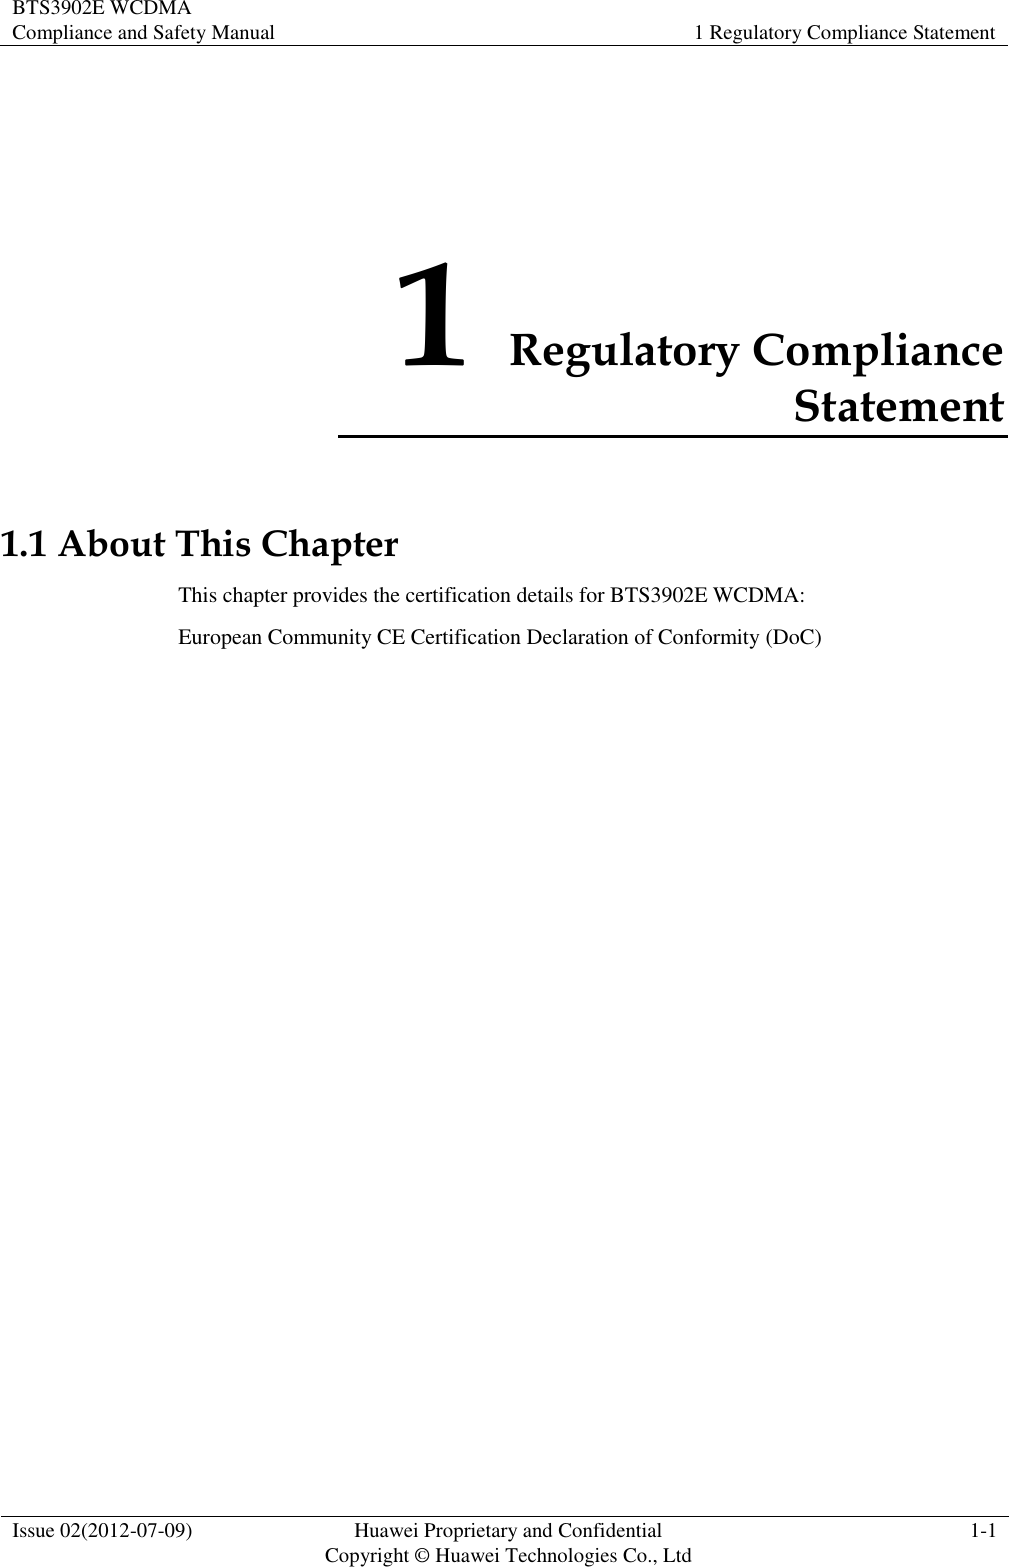 BTS3902E WCDMA Compliance and Safety Manual 1 Regulatory Compliance Statement  Issue 02(2012-07-09) Huawei Proprietary and Confidential           Copyright © Huawei Technologies Co., Ltd 1-1  1 Regulatory Compliance Statement 1.1 About This Chapter This chapter provides the certification details for BTS3902E WCDMA: European Community CE Certification Declaration of Conformity (DoC) 